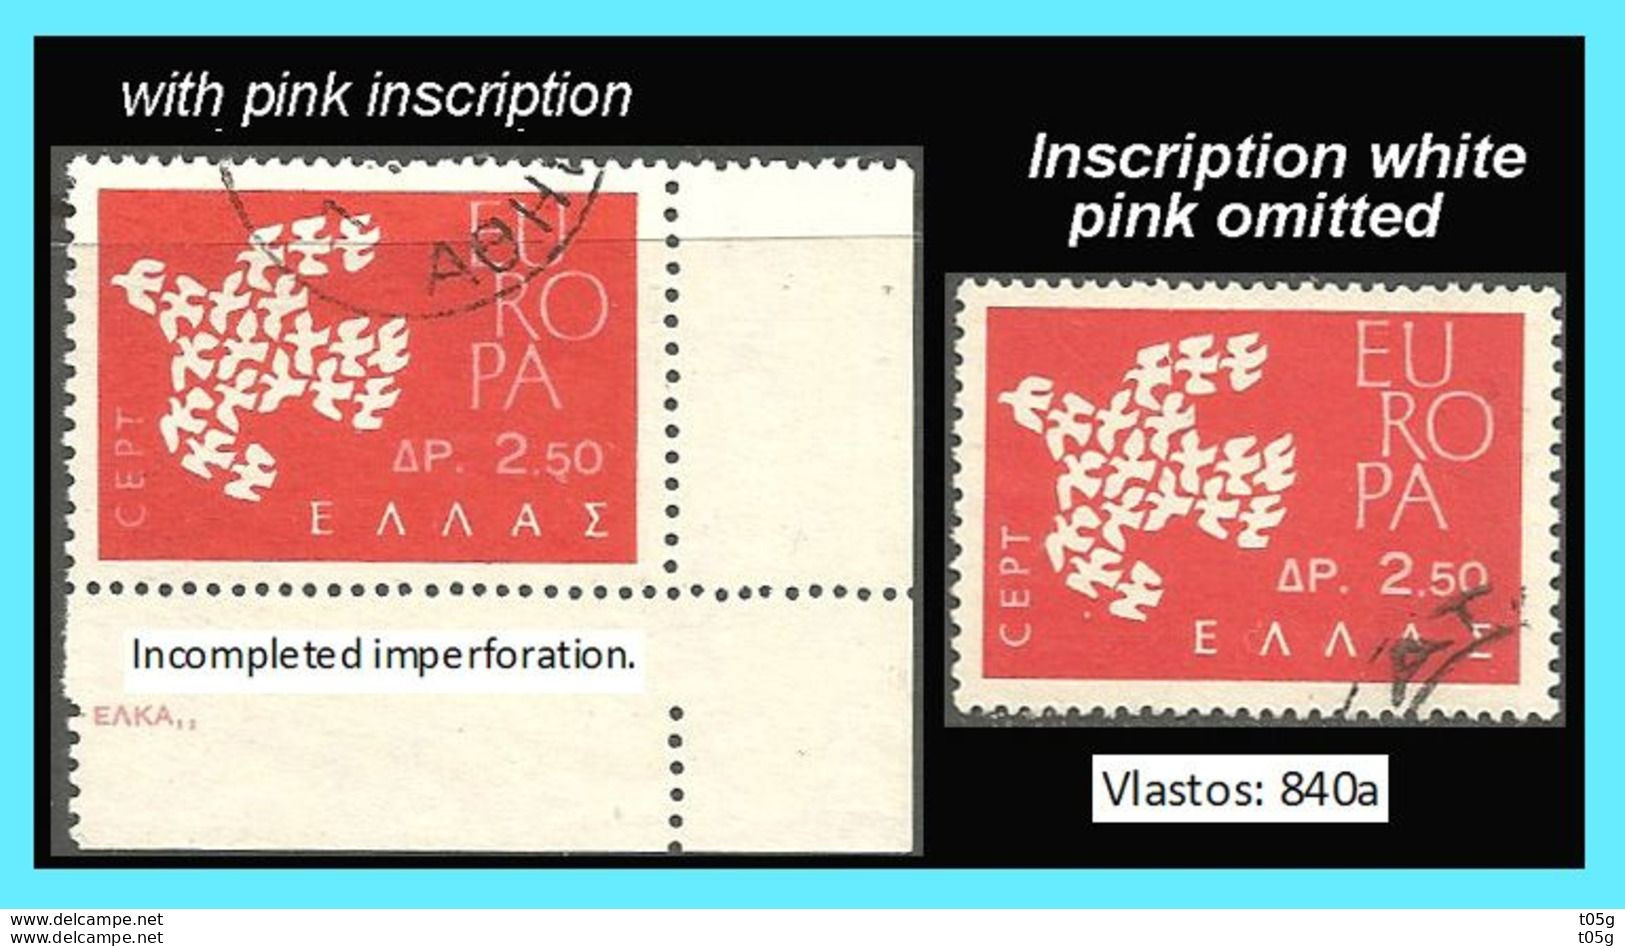 GREECE-GRECe - HELLAS -EUROPA CEPT 1961: 2.50drx Inscription White, Pink Omitted Used - Gebraucht